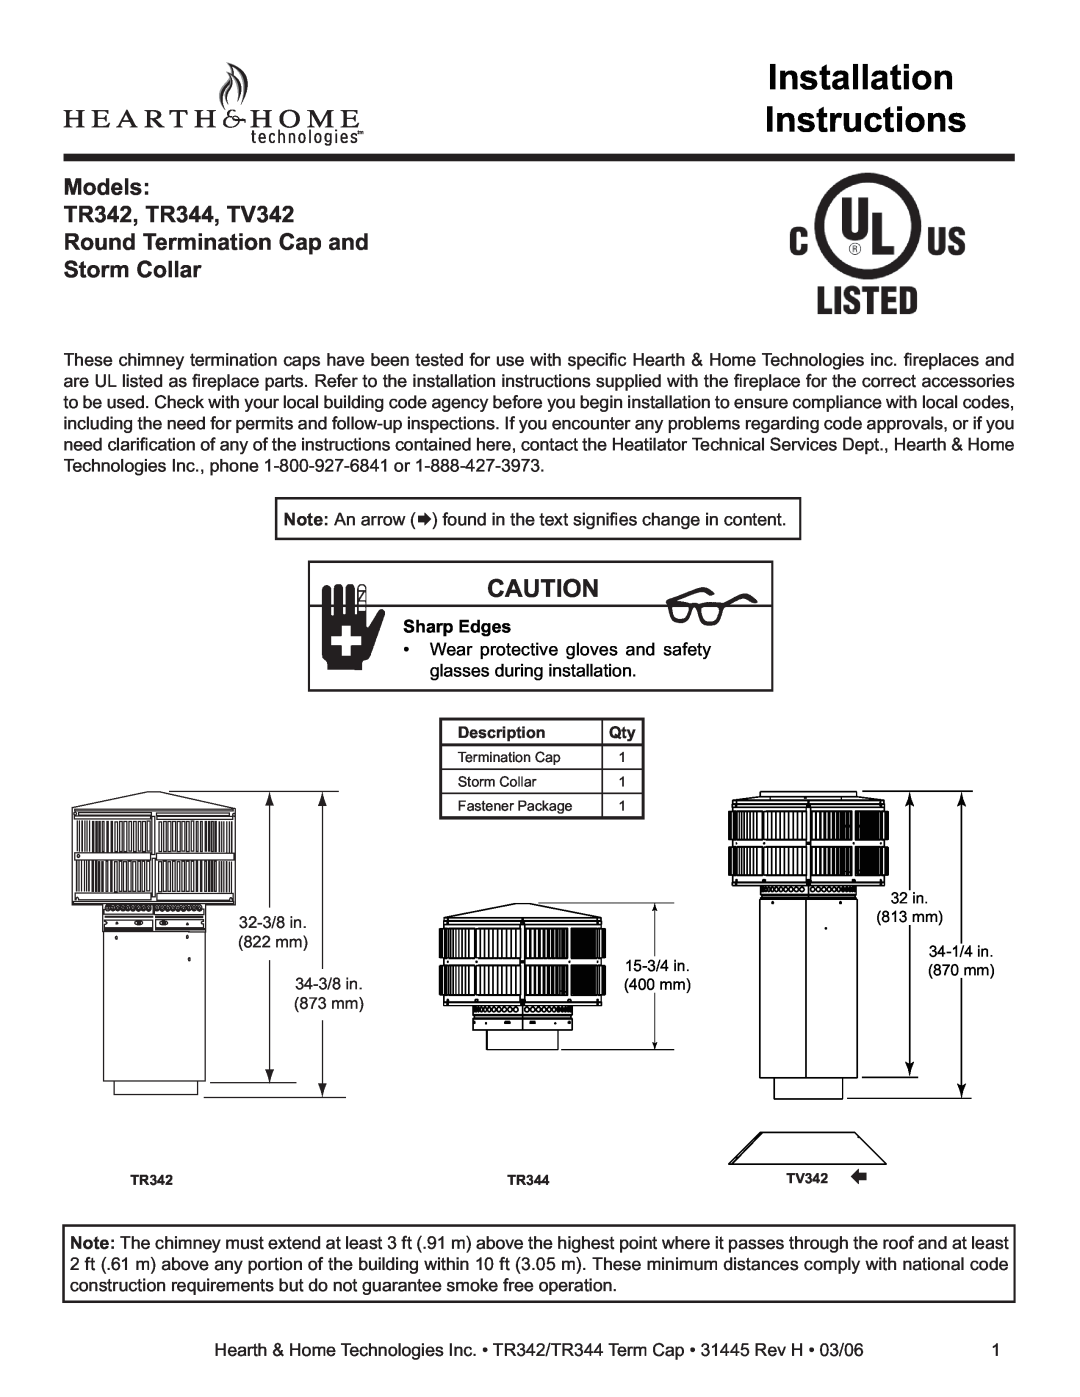 Hearth and Home Technologies TR344, TR342, TV342 installation instructions Sharp Edges, Installation Instructions 